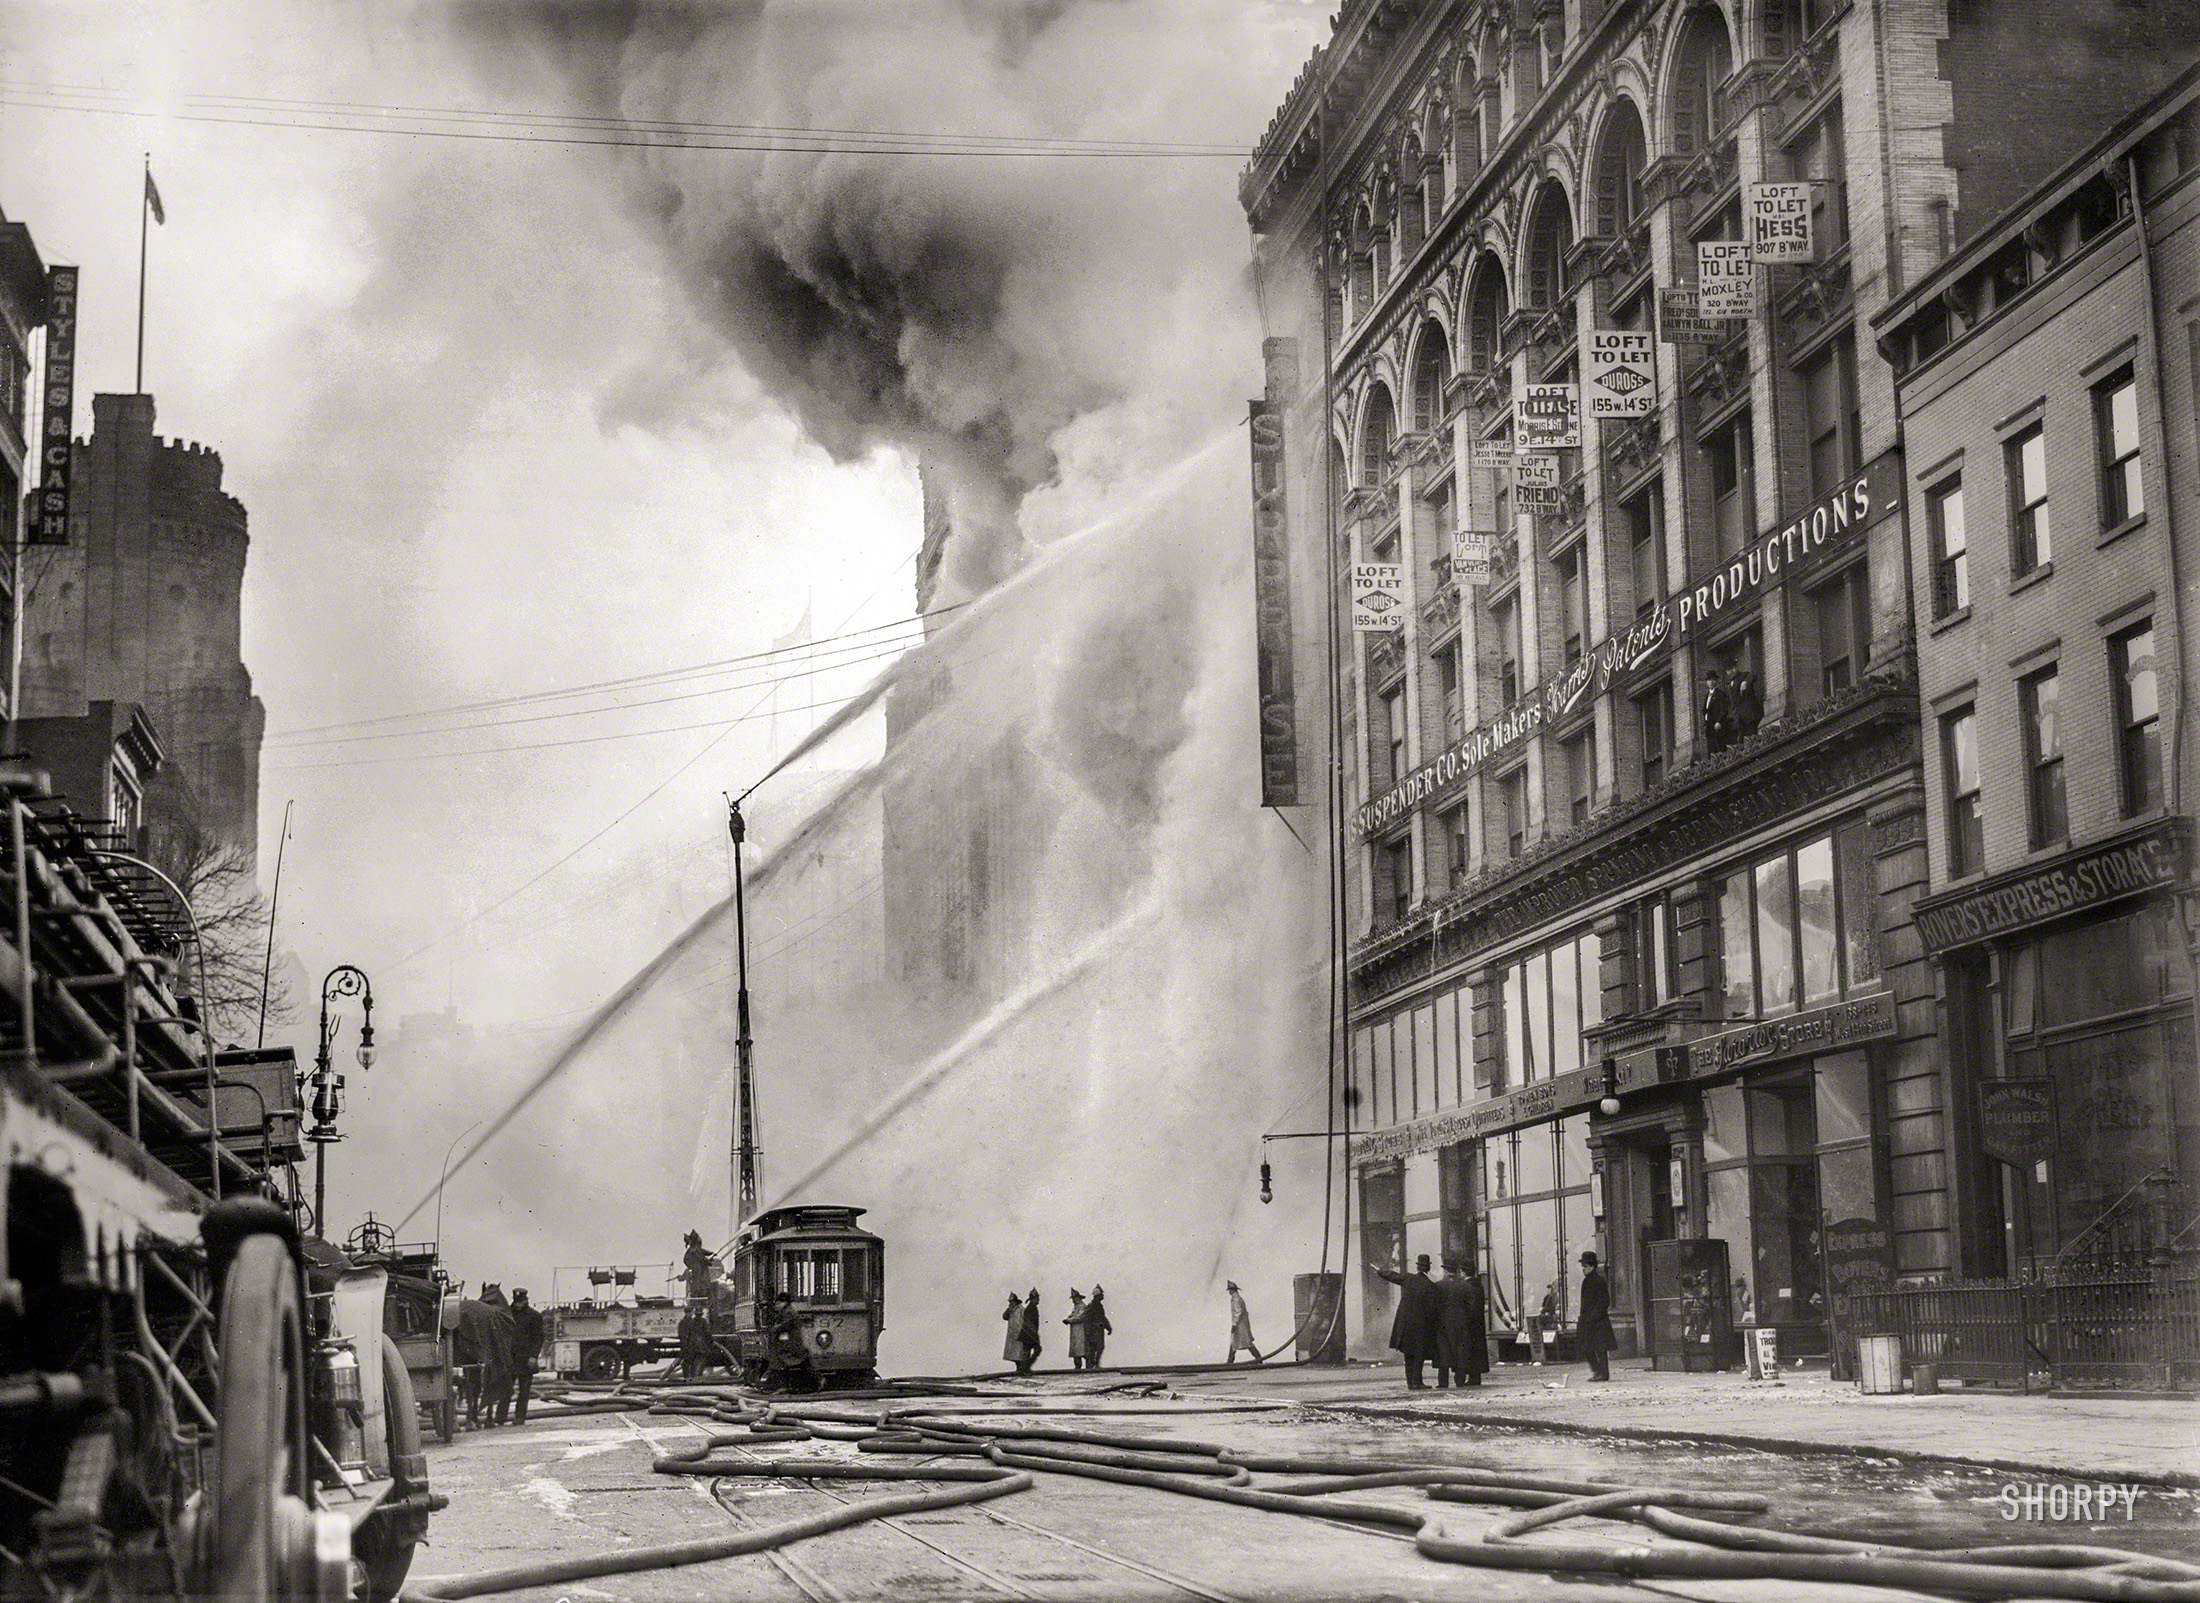 December 20, 1909. "Firemen spraying burning building on West 14th Street, New York." 5x7 glass negative, Bain News Service. View full size.
&nbsp; &nbsp; &nbsp; &nbsp; Three million gallons of water from the high-pressure mains were pumped into a fire that destroyed a large seven-story factory and loft building at 180-188 West Fourteenth Street yesterday morning, and for five hours the fire, which raged until the afternoon, completely cut off traffic on that street. The pavement and sidewalks and many buildings for almost a block were coated with thick mid-Winter ice. Fire and water together provided a spectacle for thousands of Christmas shoppers who crowded both sides of the street.
&nbsp; &nbsp; &nbsp; &nbsp; Although there were no injuries from the fire, it caused damage of $200,000. Workers at the training school of the Salvation Army headquarters, adjoining the building on the east, were routed from their beds. It is not known what started the fire.
-- New York Times, 12/21/1909